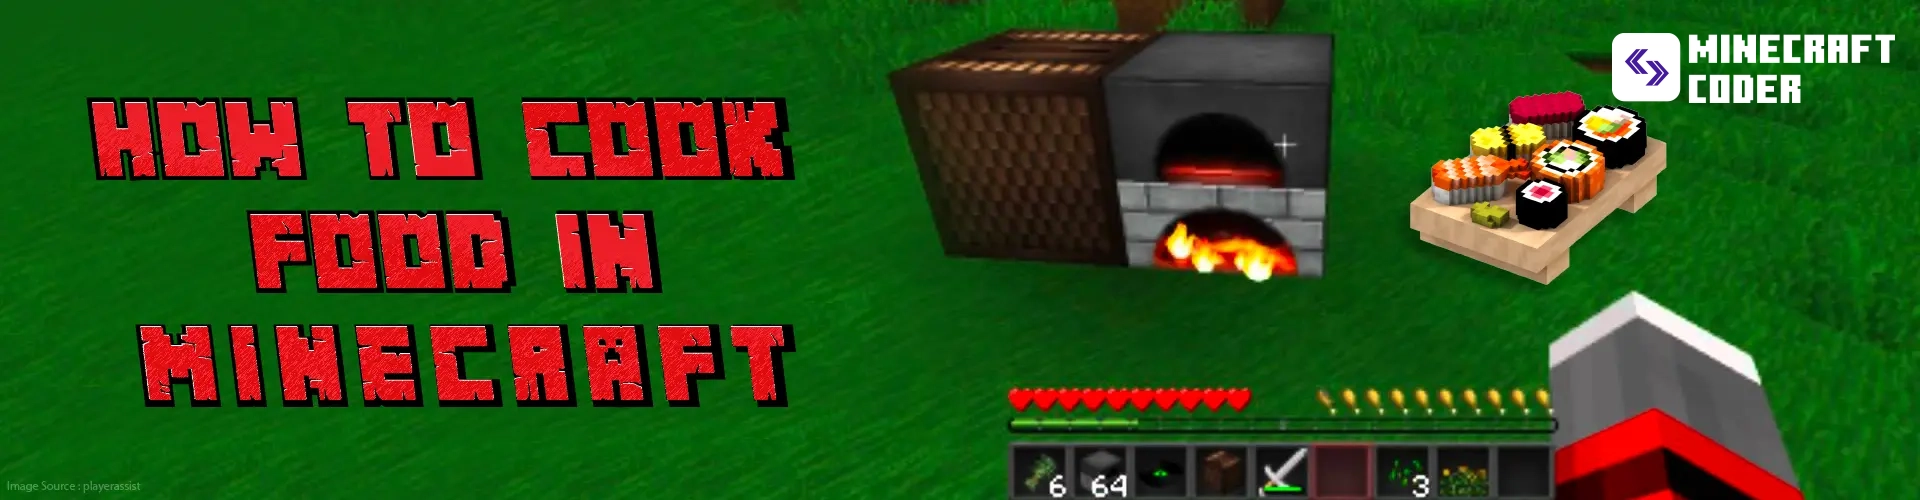 COOK FOOD IN MINECRAFT